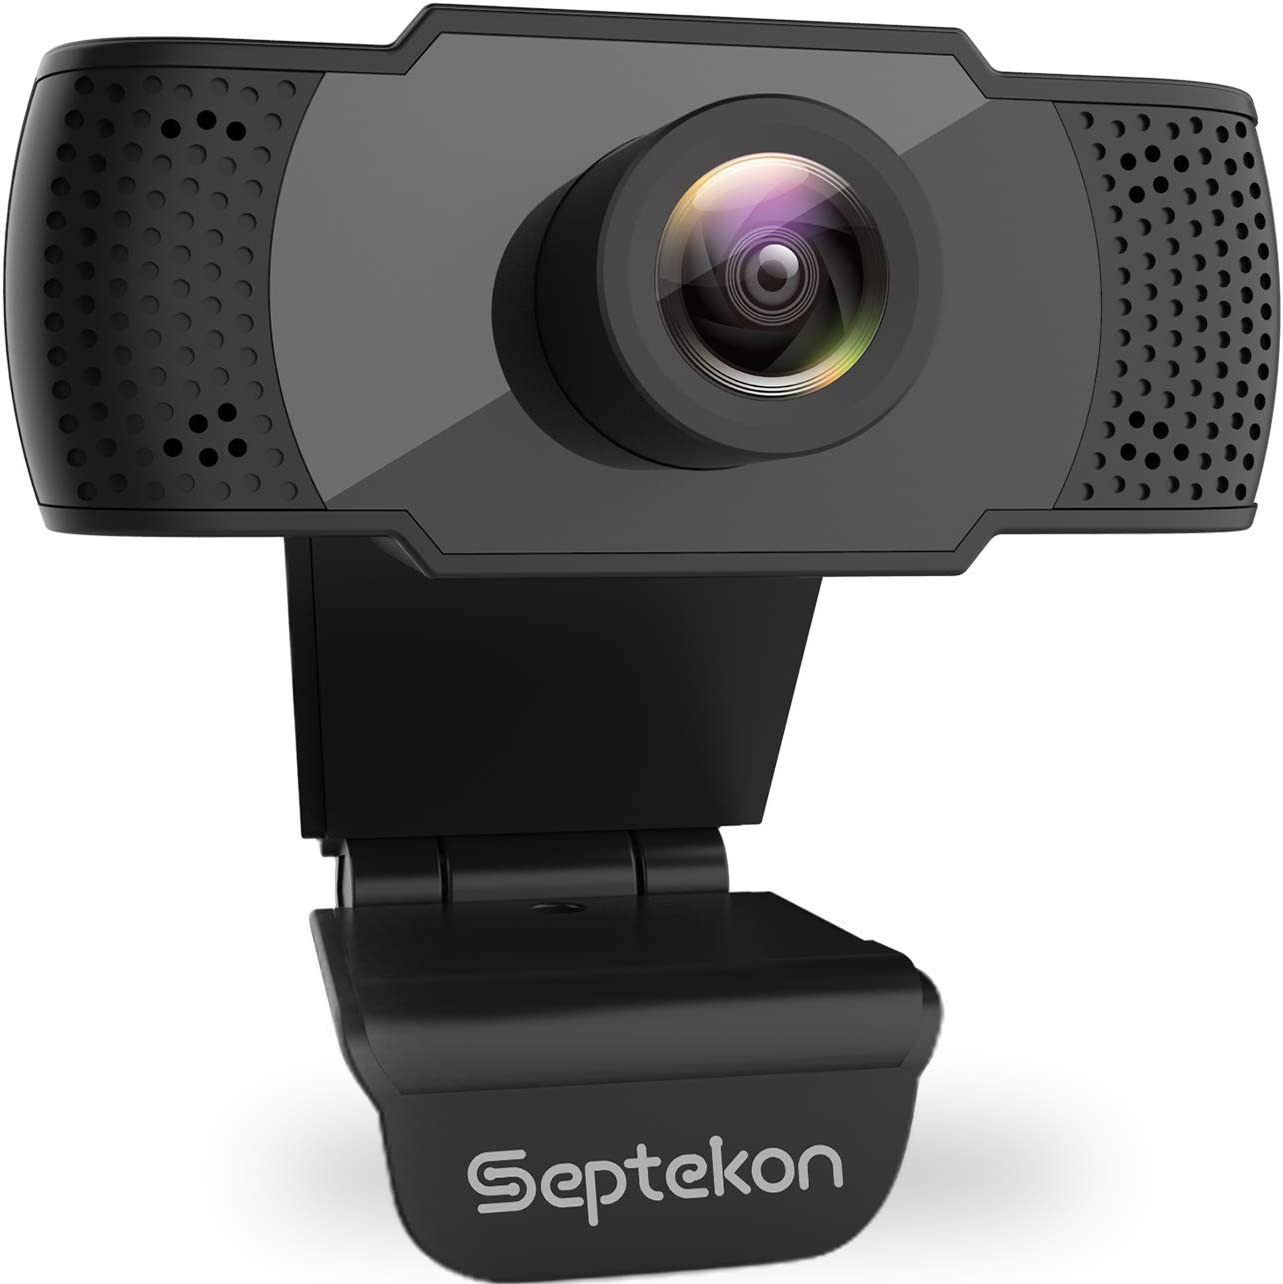 1080P HD Webcam with Microphone, Streaming Computer Web Camera for Laptop/Deskto